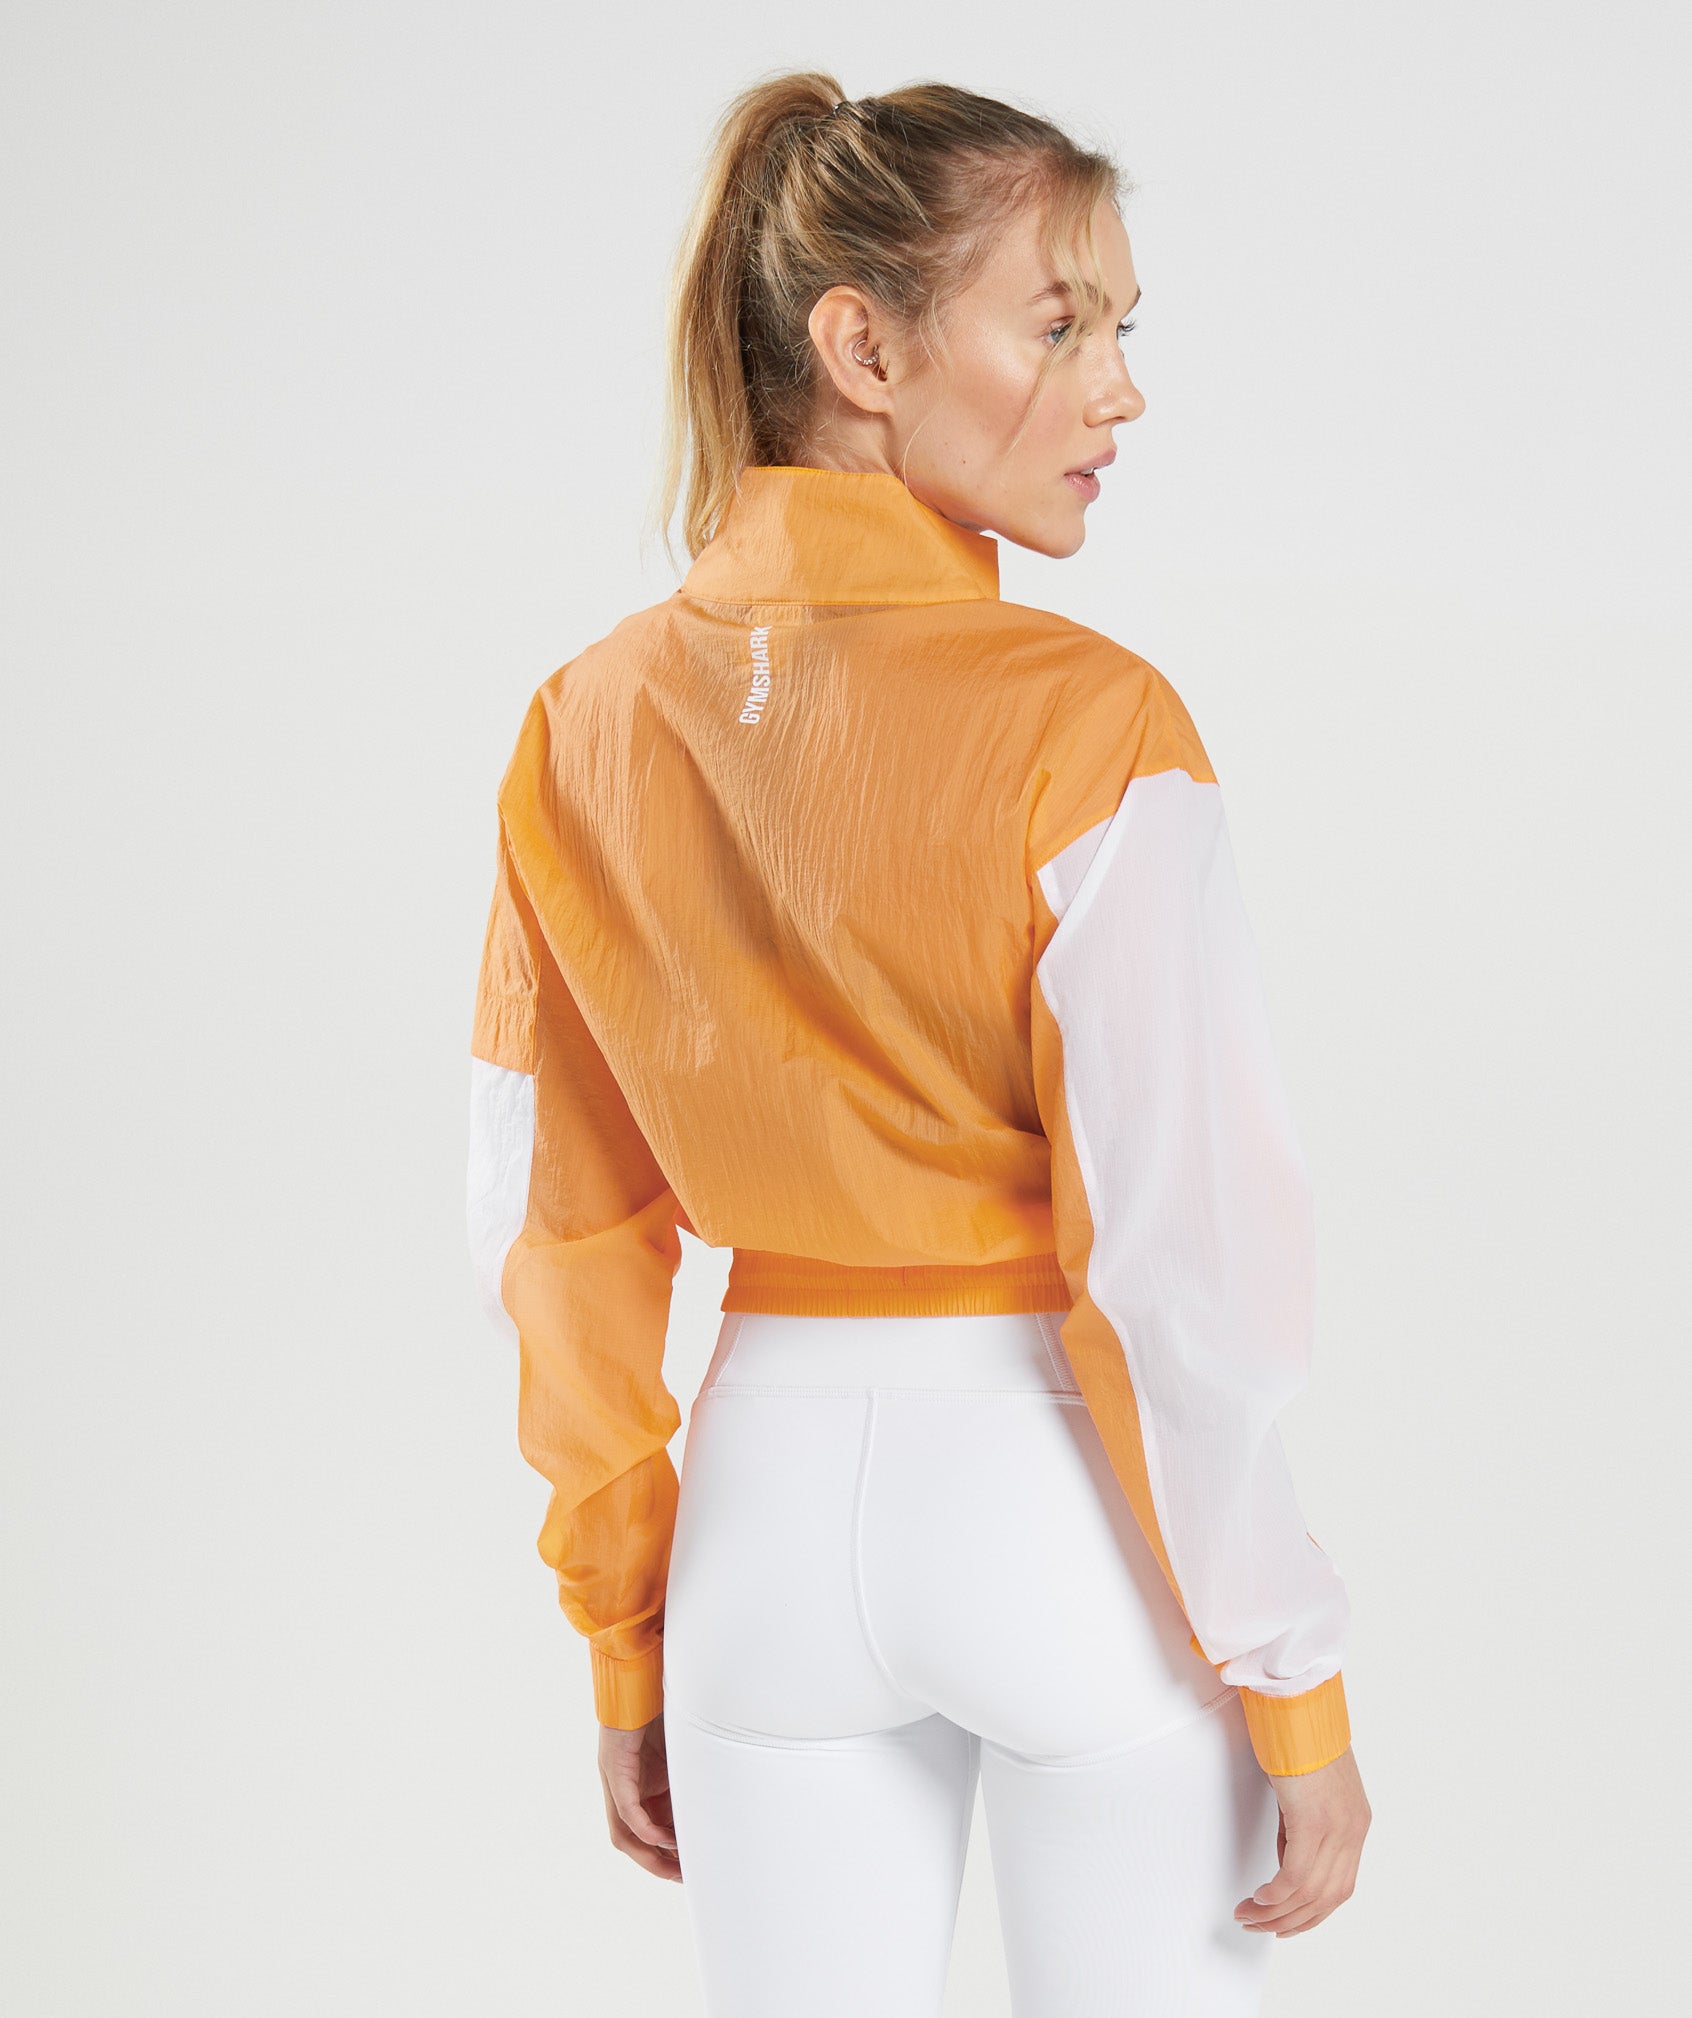 Pulse Woven Jacket in Apricot Orange/White - view 2